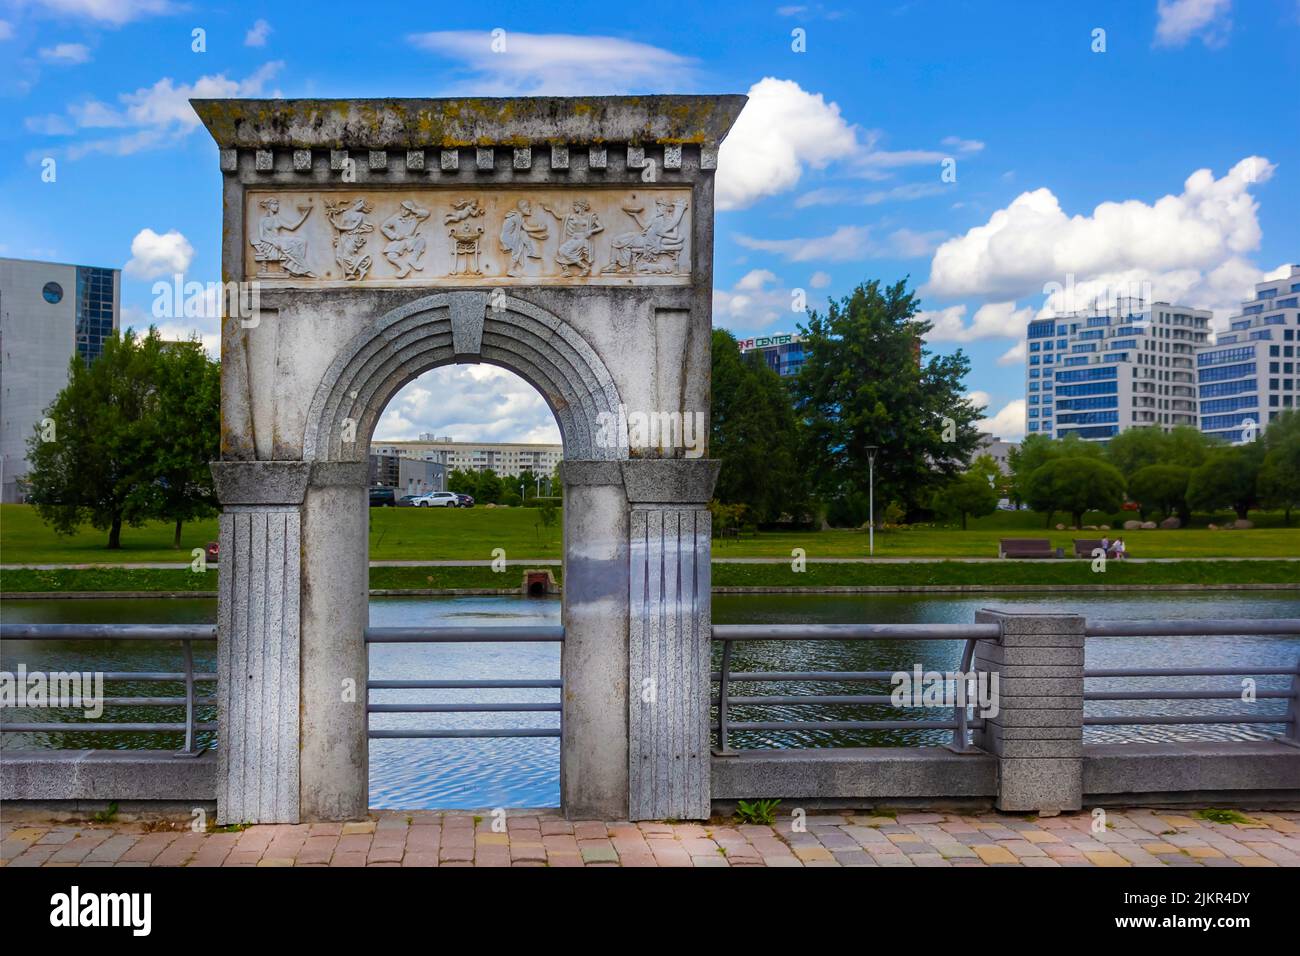 Elements of the architecture of buildings, ancient arches and columns, stucco and patterns. On the street of Minsk, embankment of the river Svisloch Stock Photo